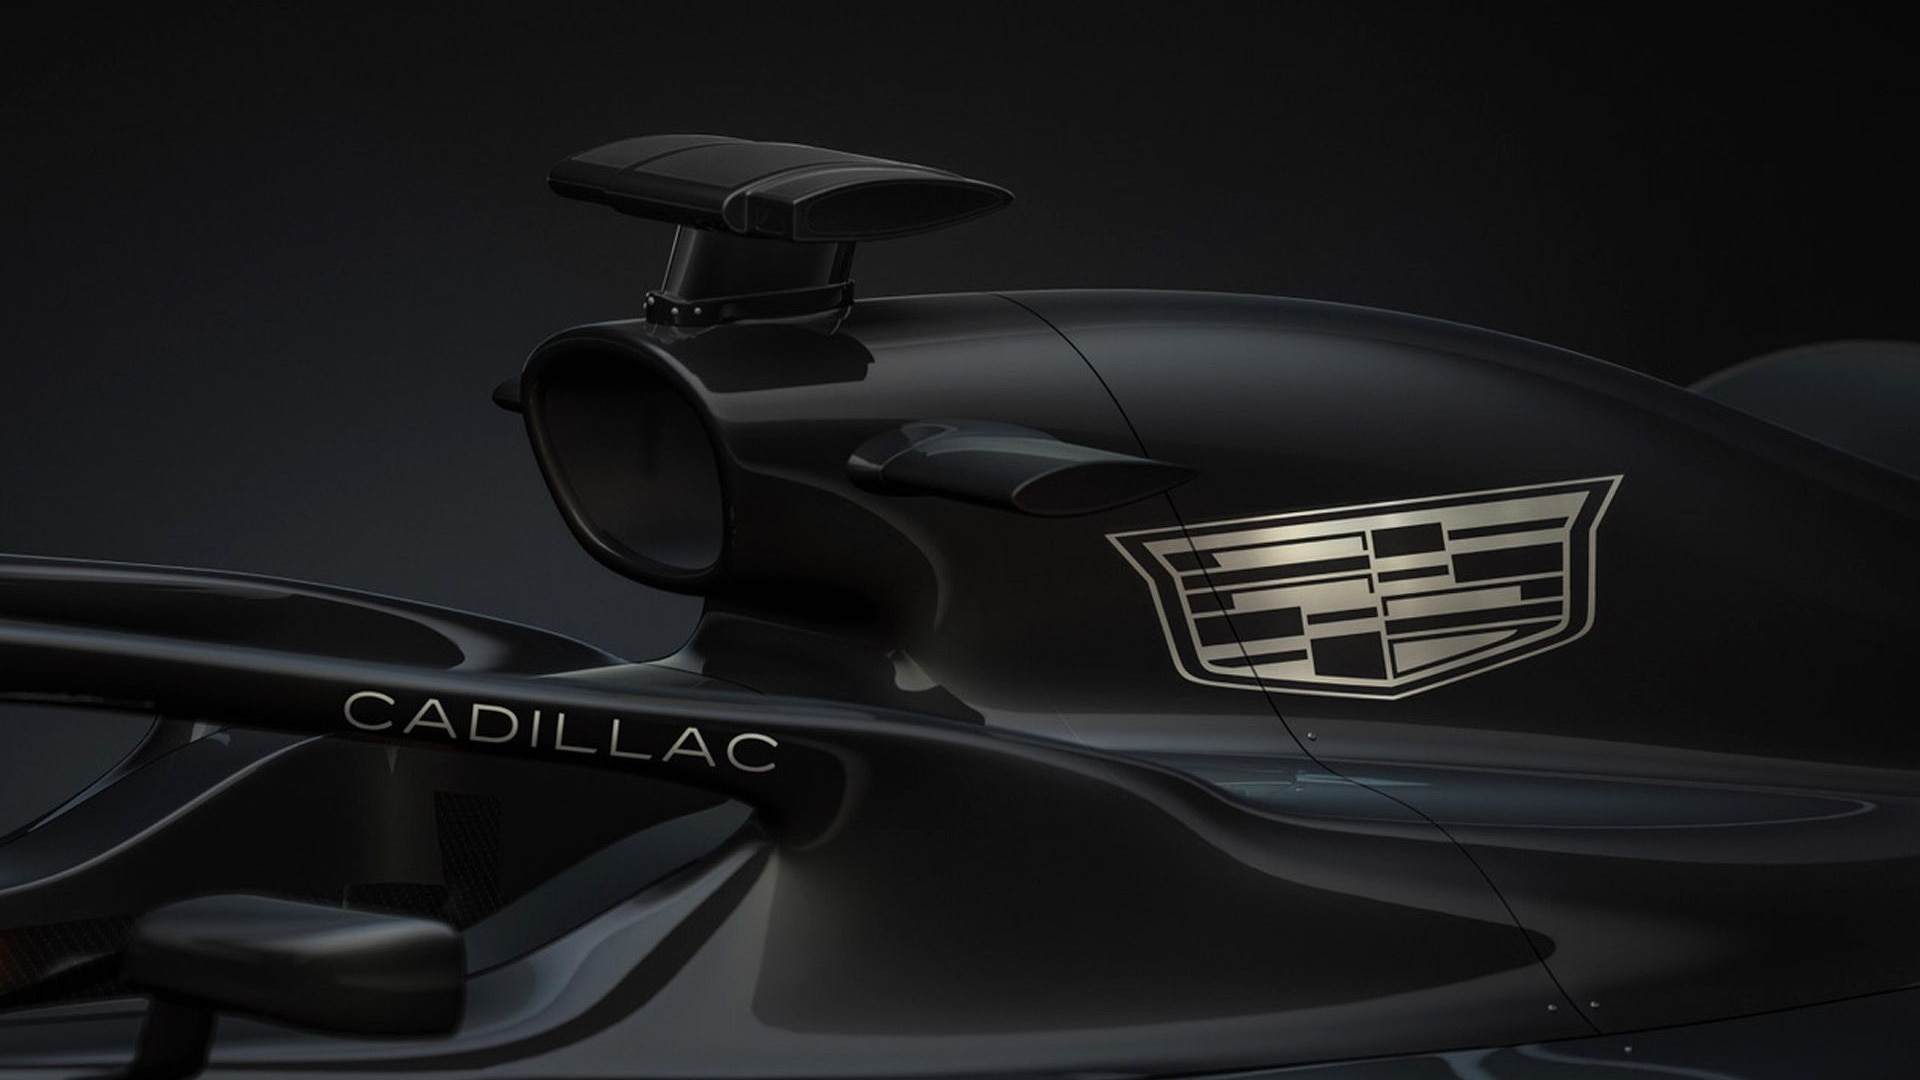 GM plans F1 power unit for Andretti Cadillac team